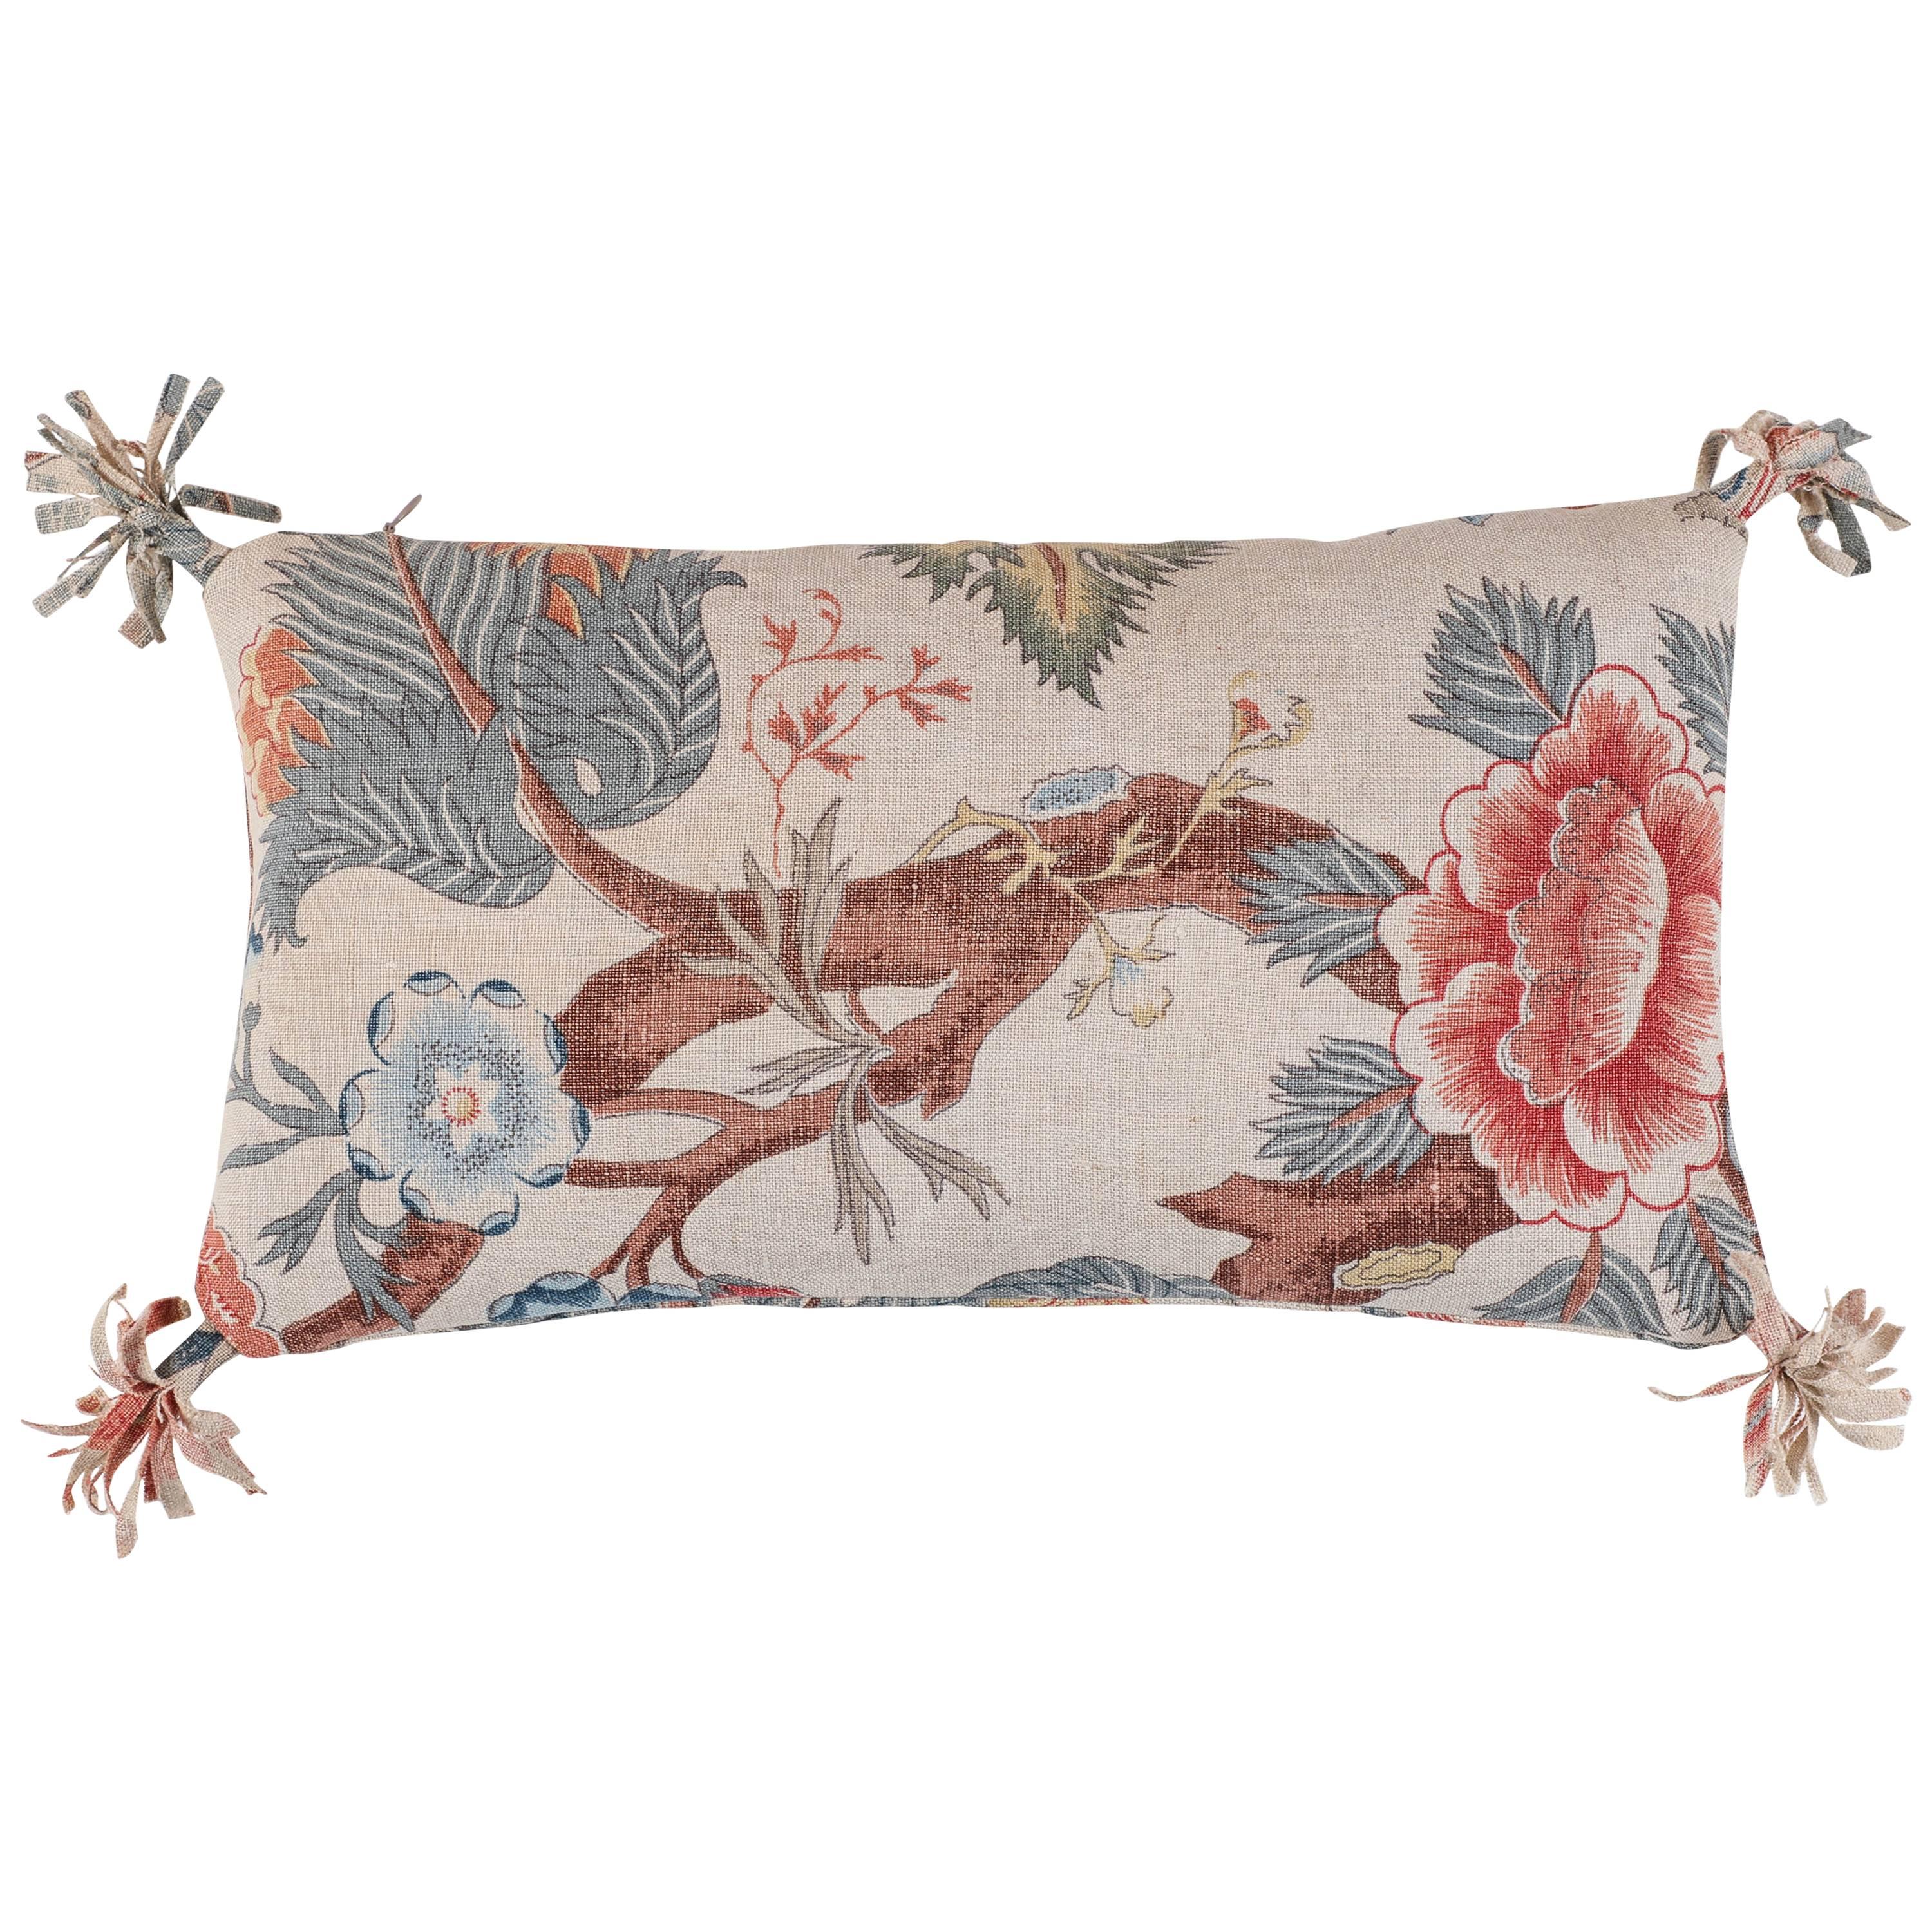 Vintage Floral Linen Pillow Double-sided For Sale